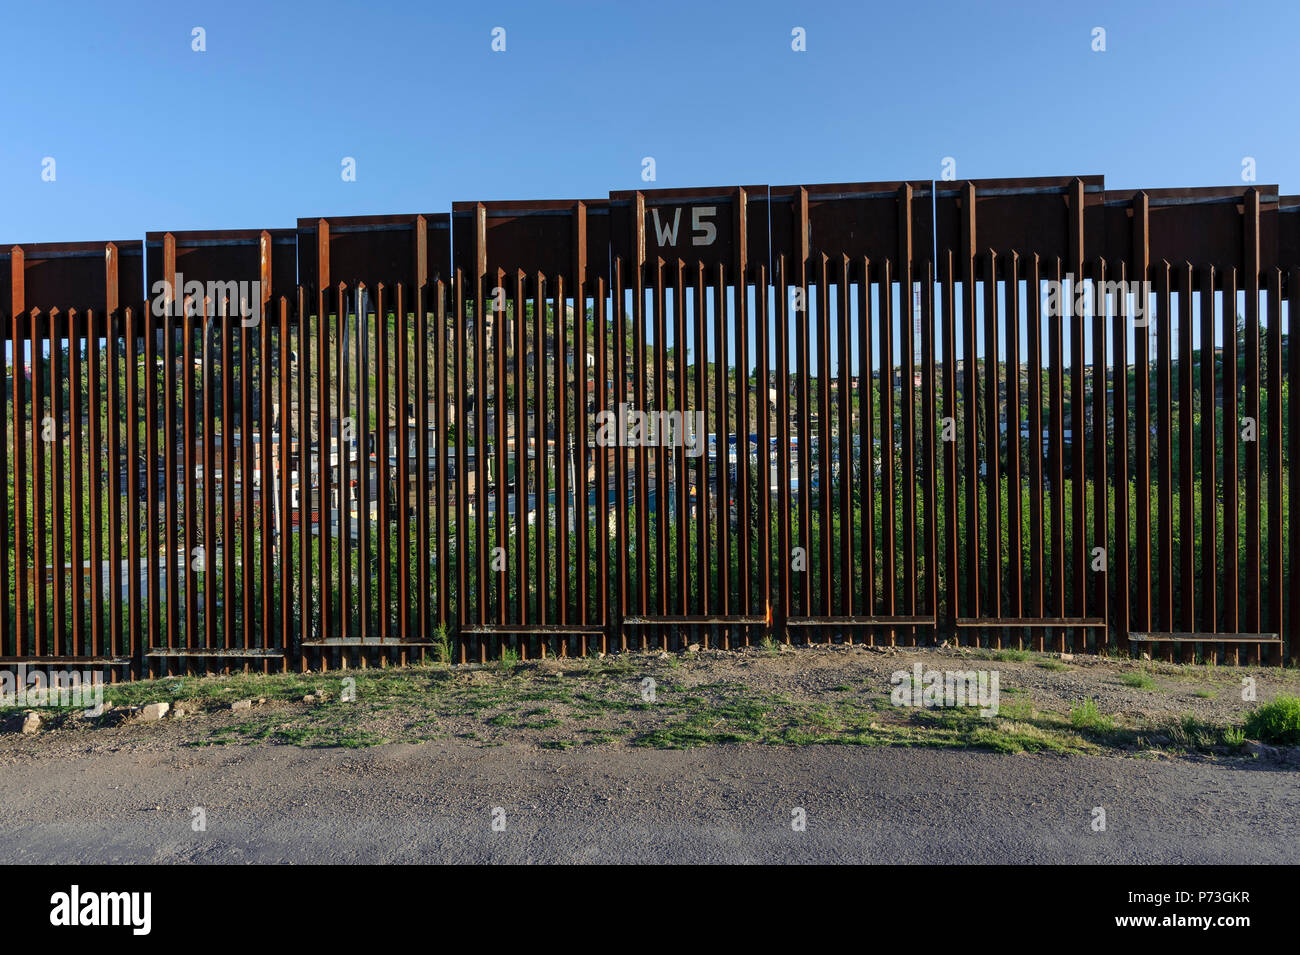 United States Border Fence, pedestrian barrier, west of Nogales Arizona, viewed from US side, Nogales Sonora Mexico visible beyond fence, April, 2018 Stock Photo